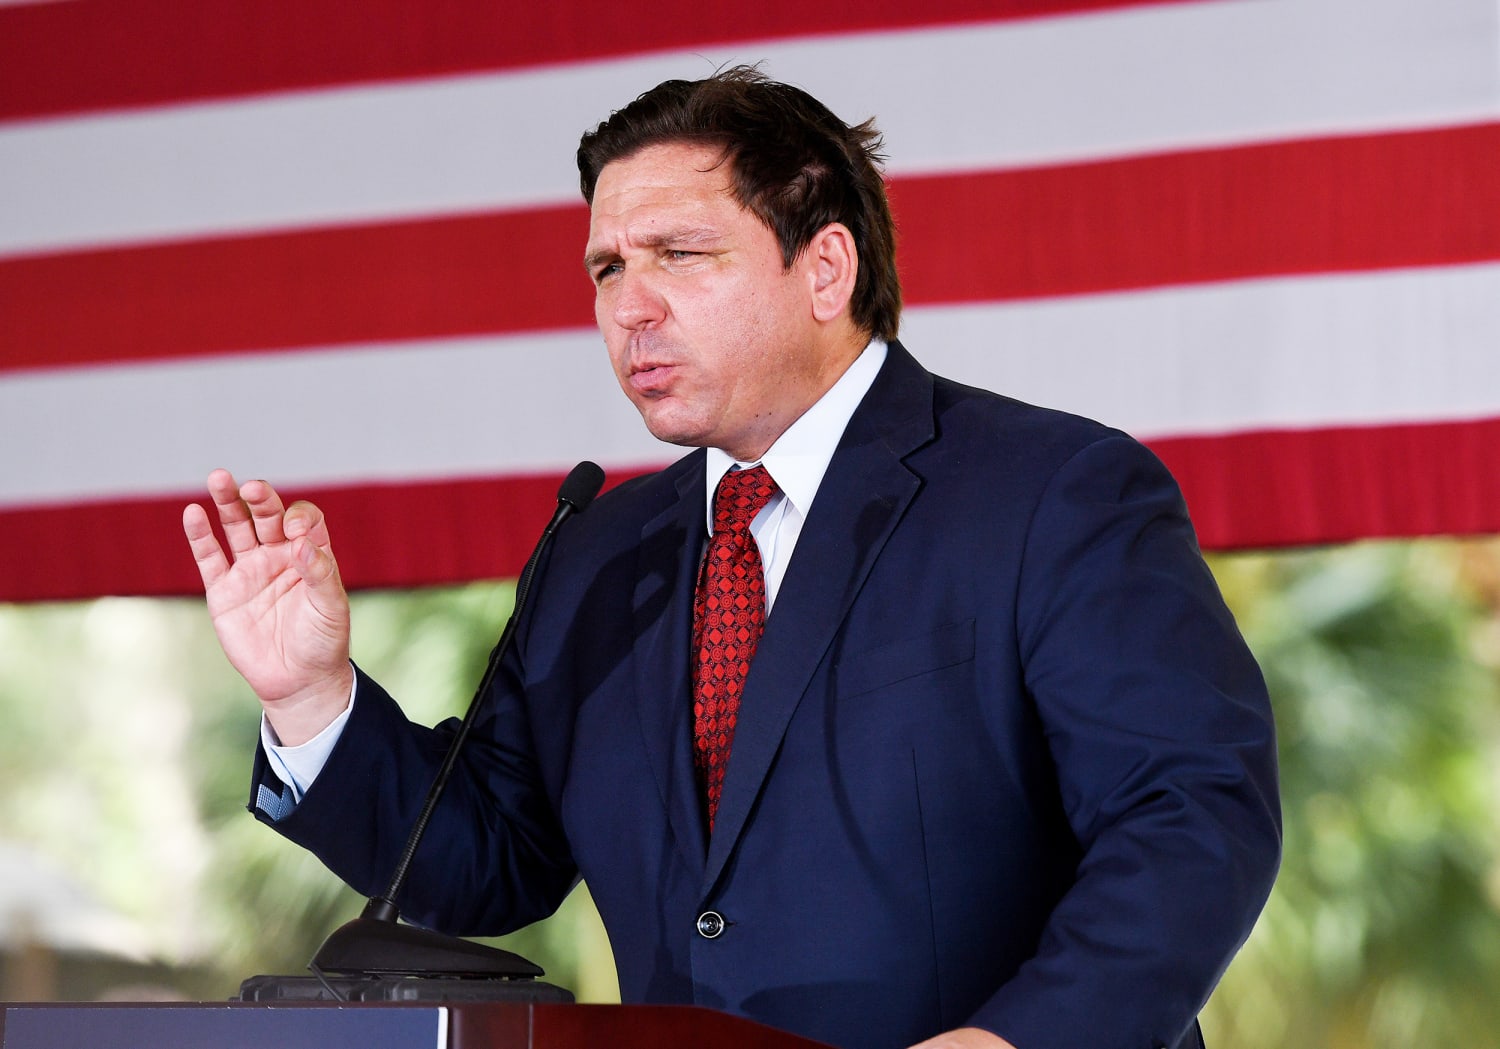 Stop calling DeSantis' racist charade a 'protest'